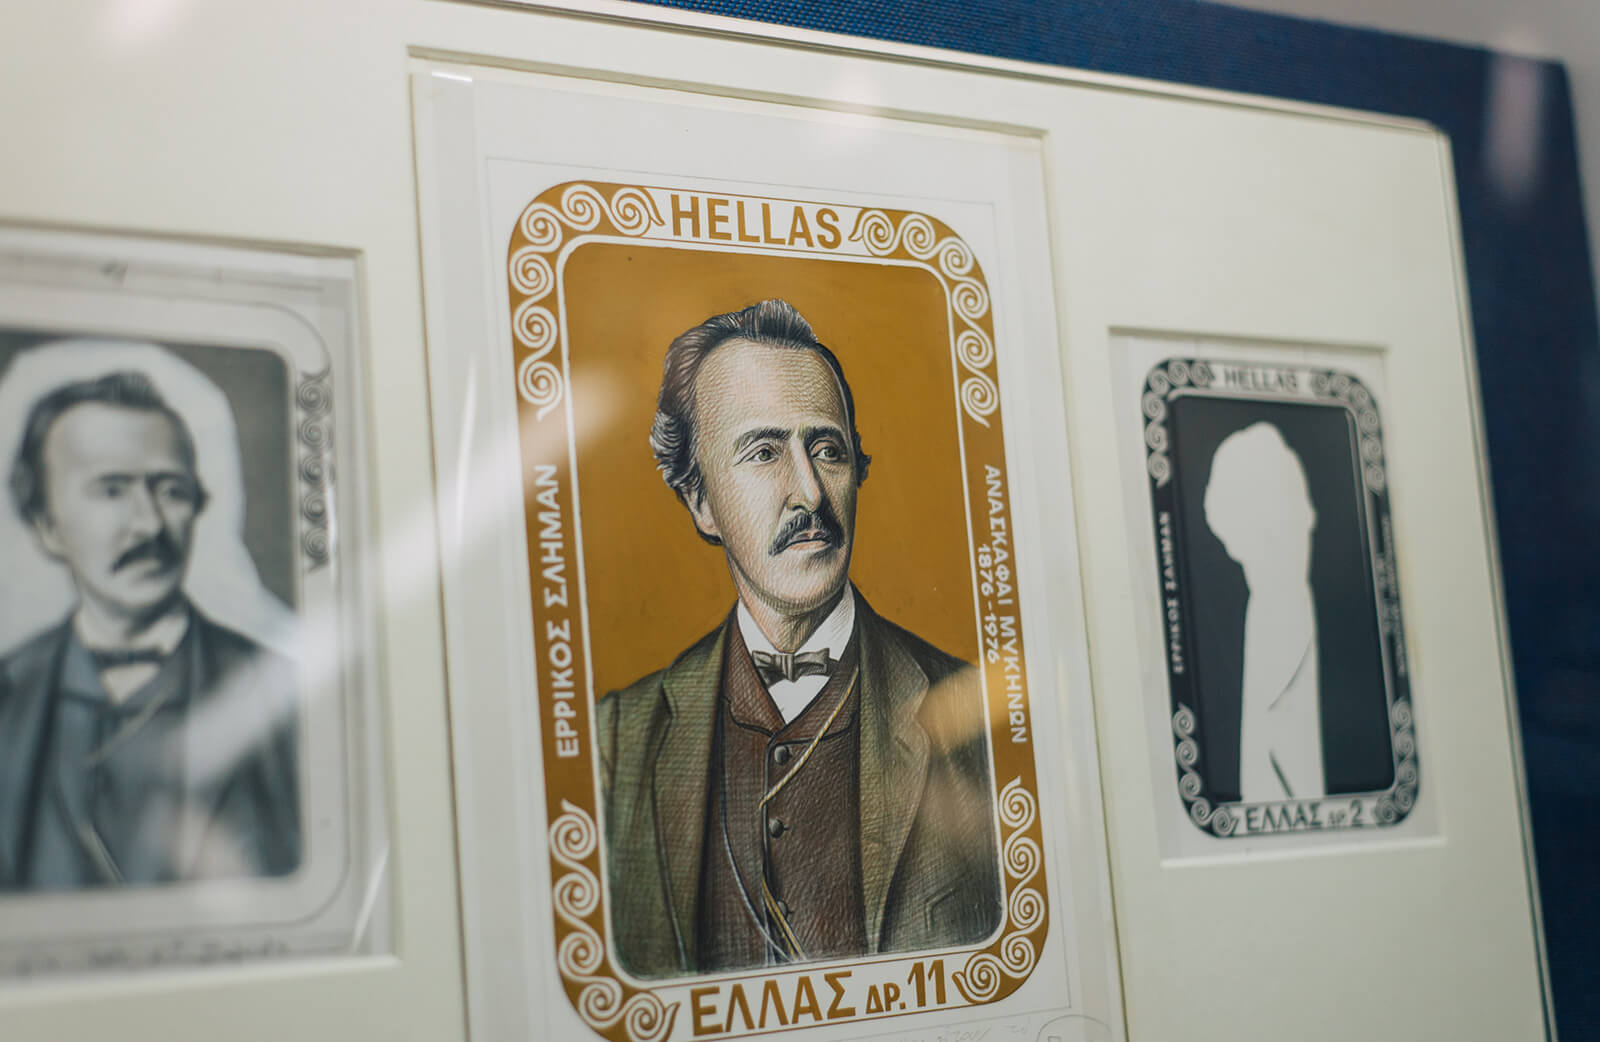 A collection of stamps at the Postal Museum. | Photo: Thomas Gravanis 